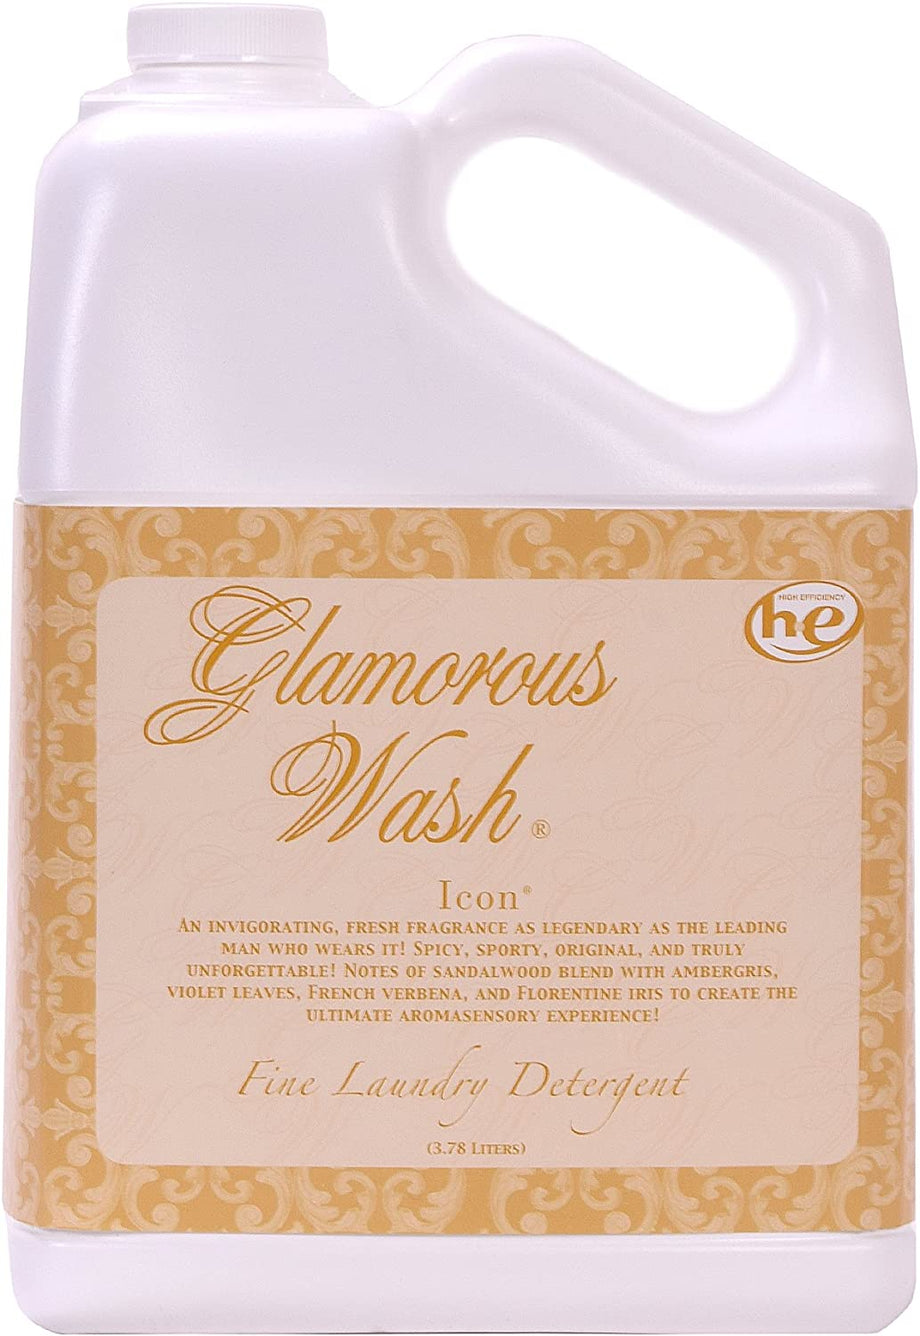 TYLER CANDLE COMPANY DIVA GLAM WASH - Magpies Gifts